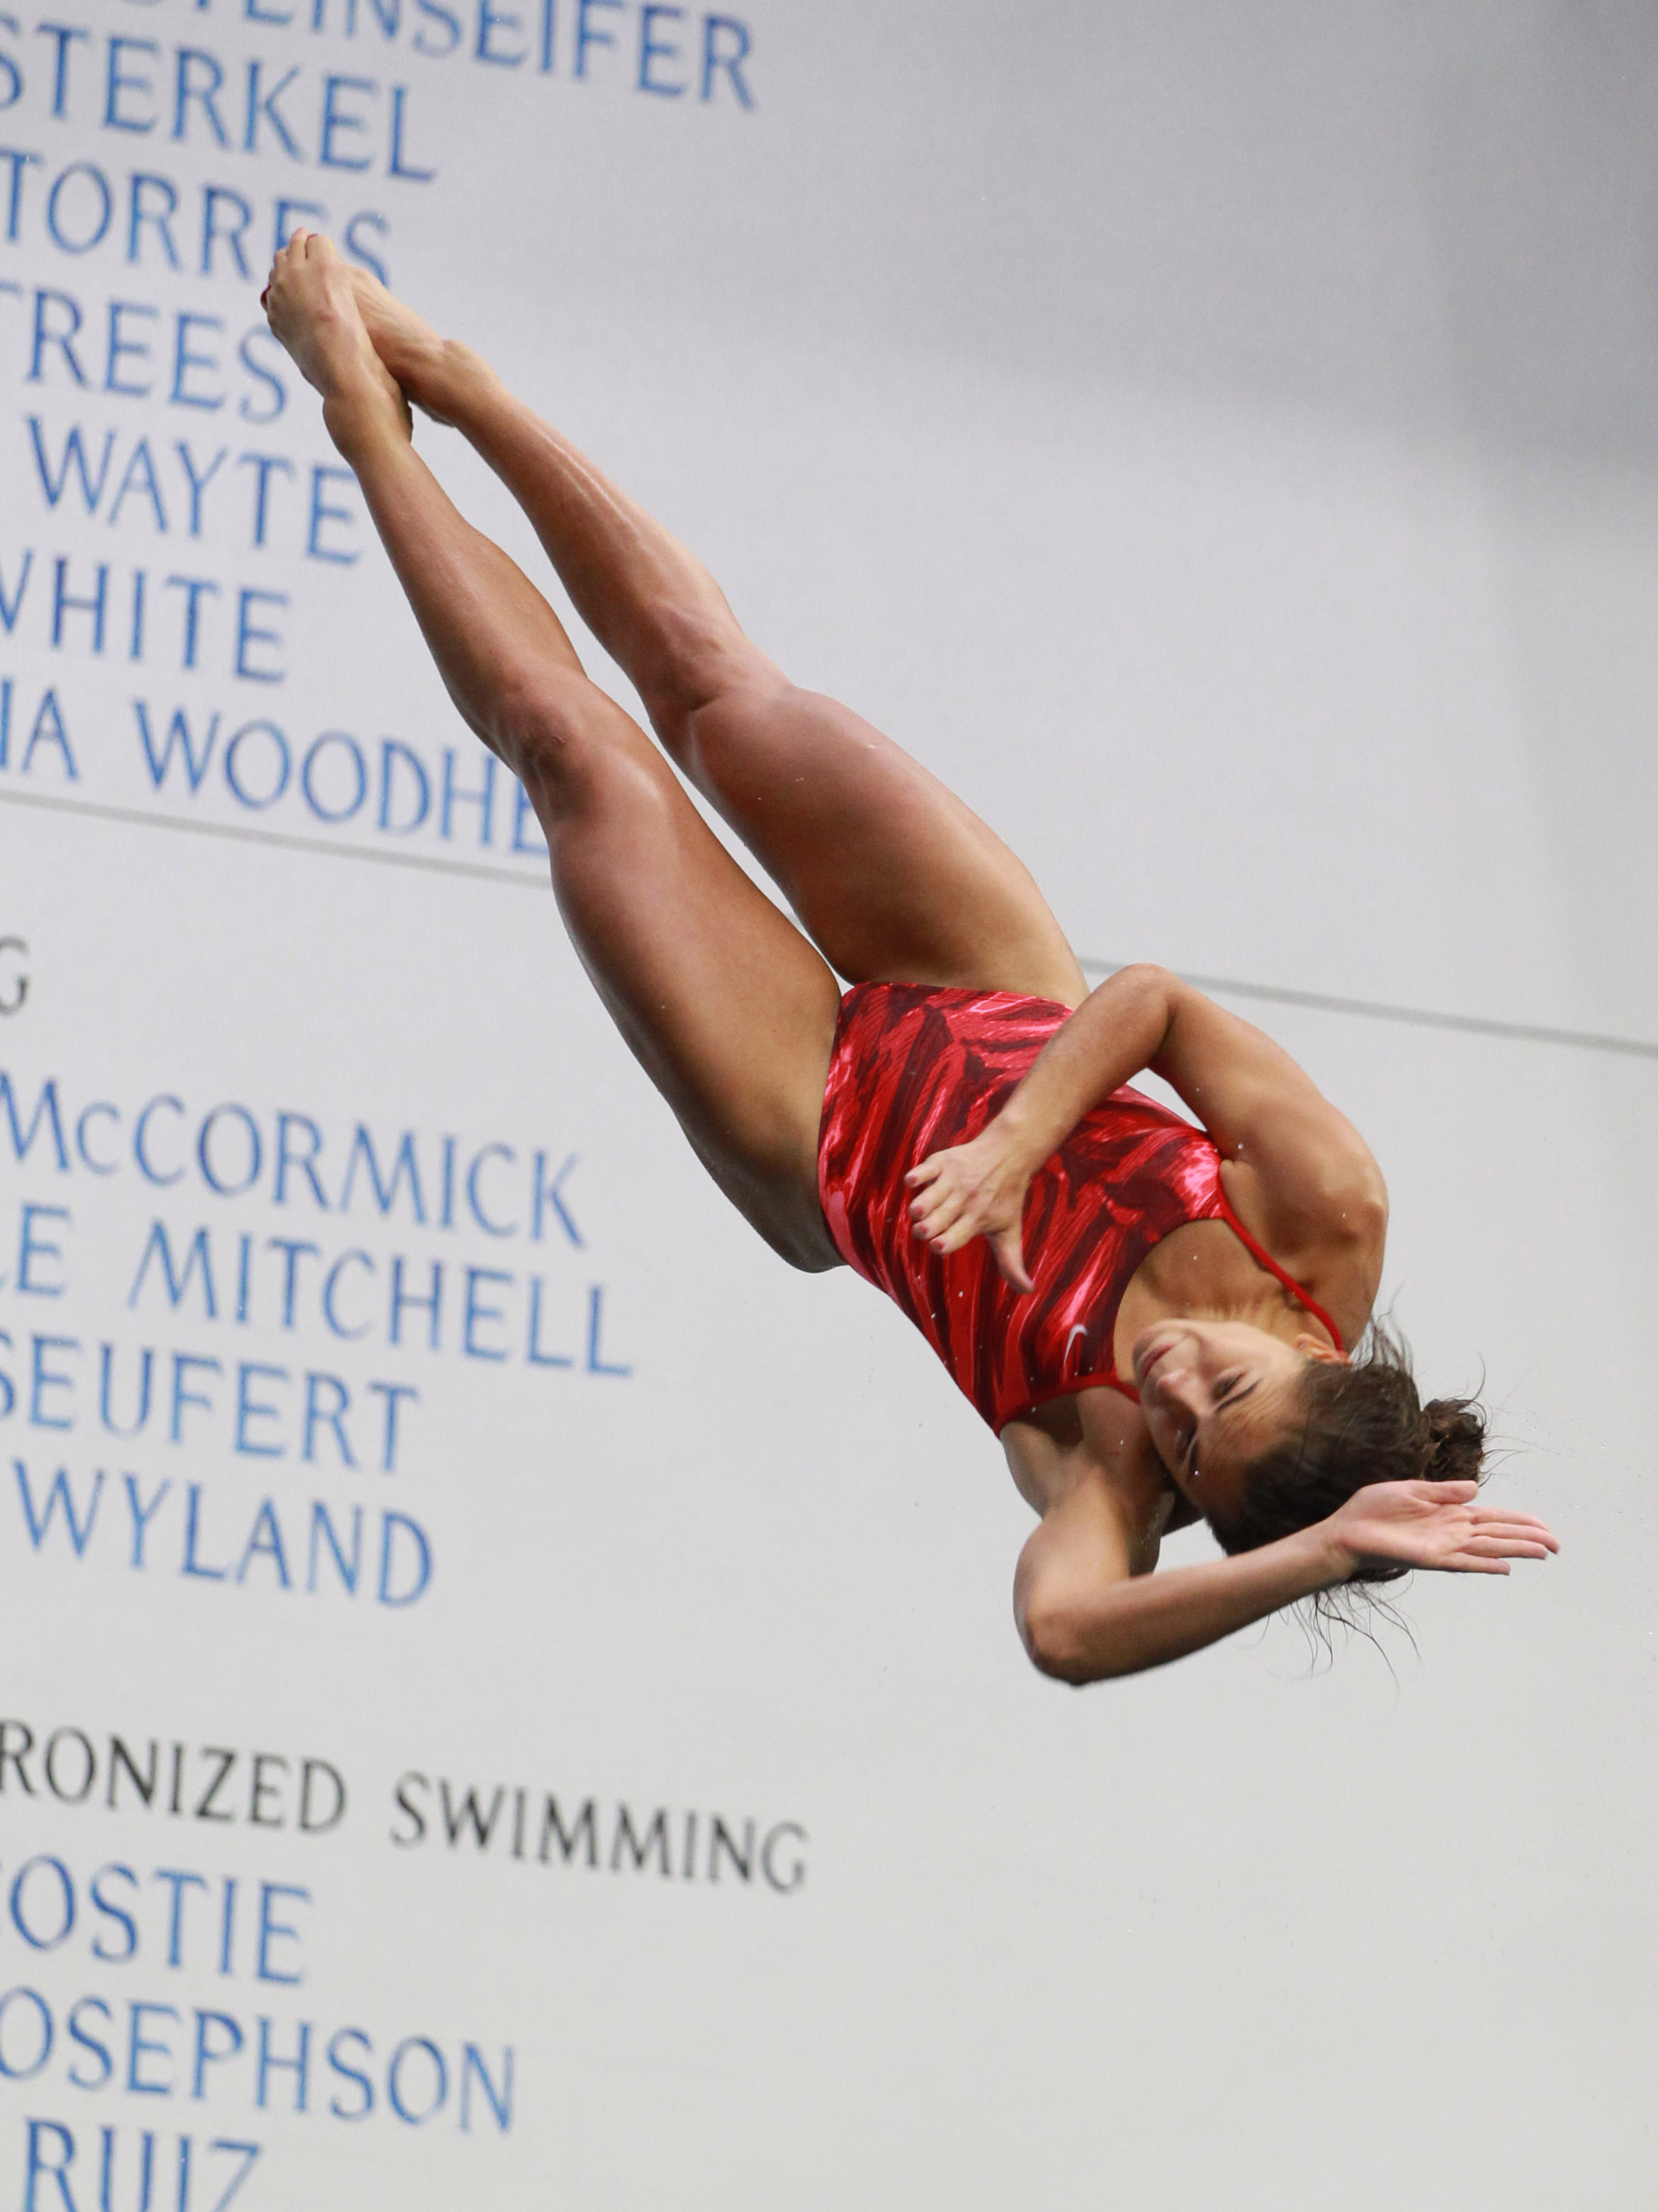 Diver Kassidy Cook Wins 3 Meter For Spot At Rio Olympics